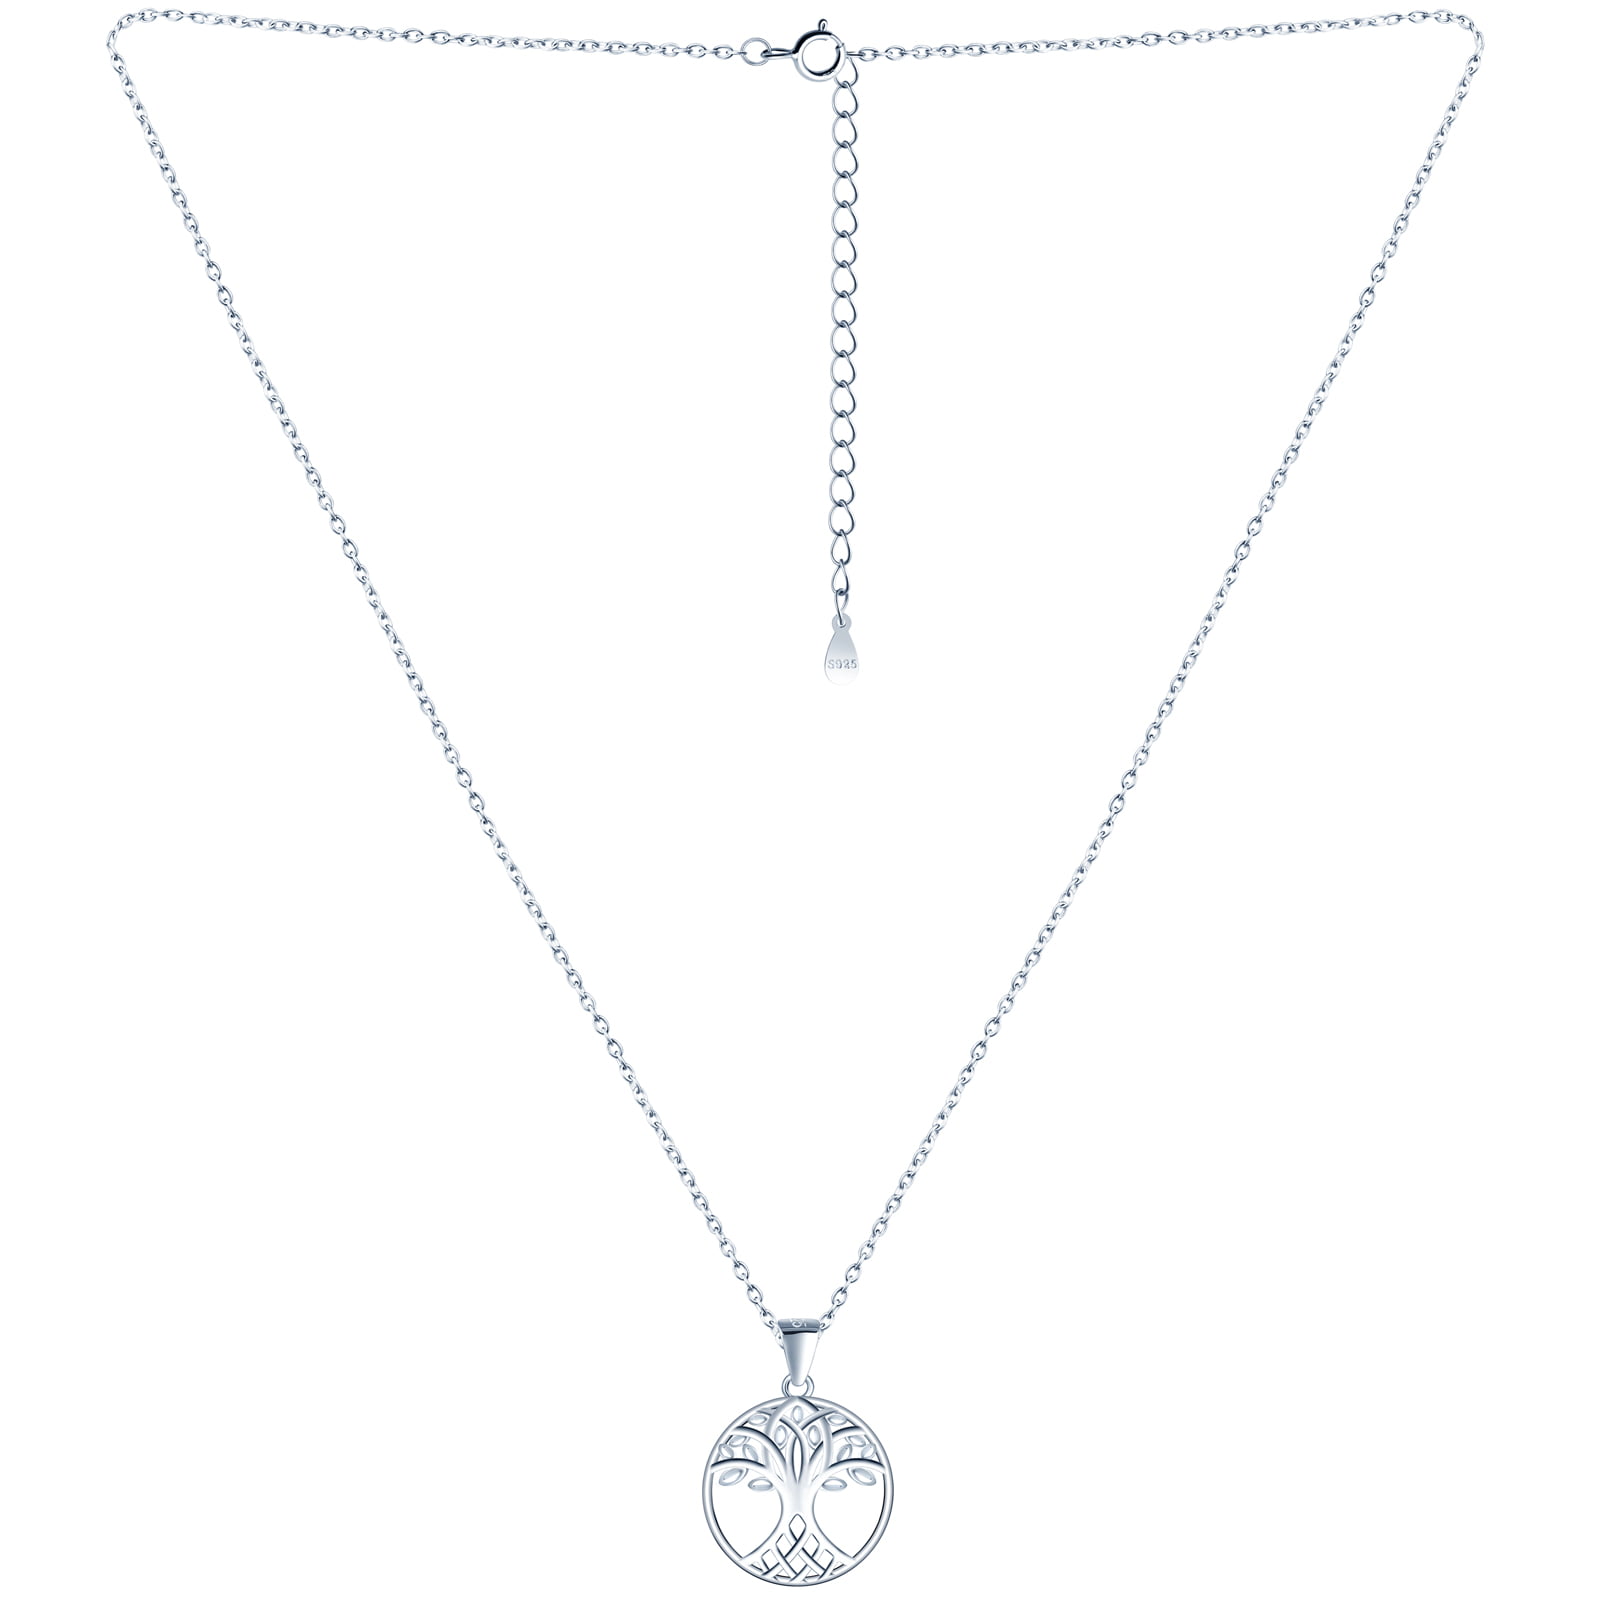 Pendant Necklaces For Women | Alfred & Co. London